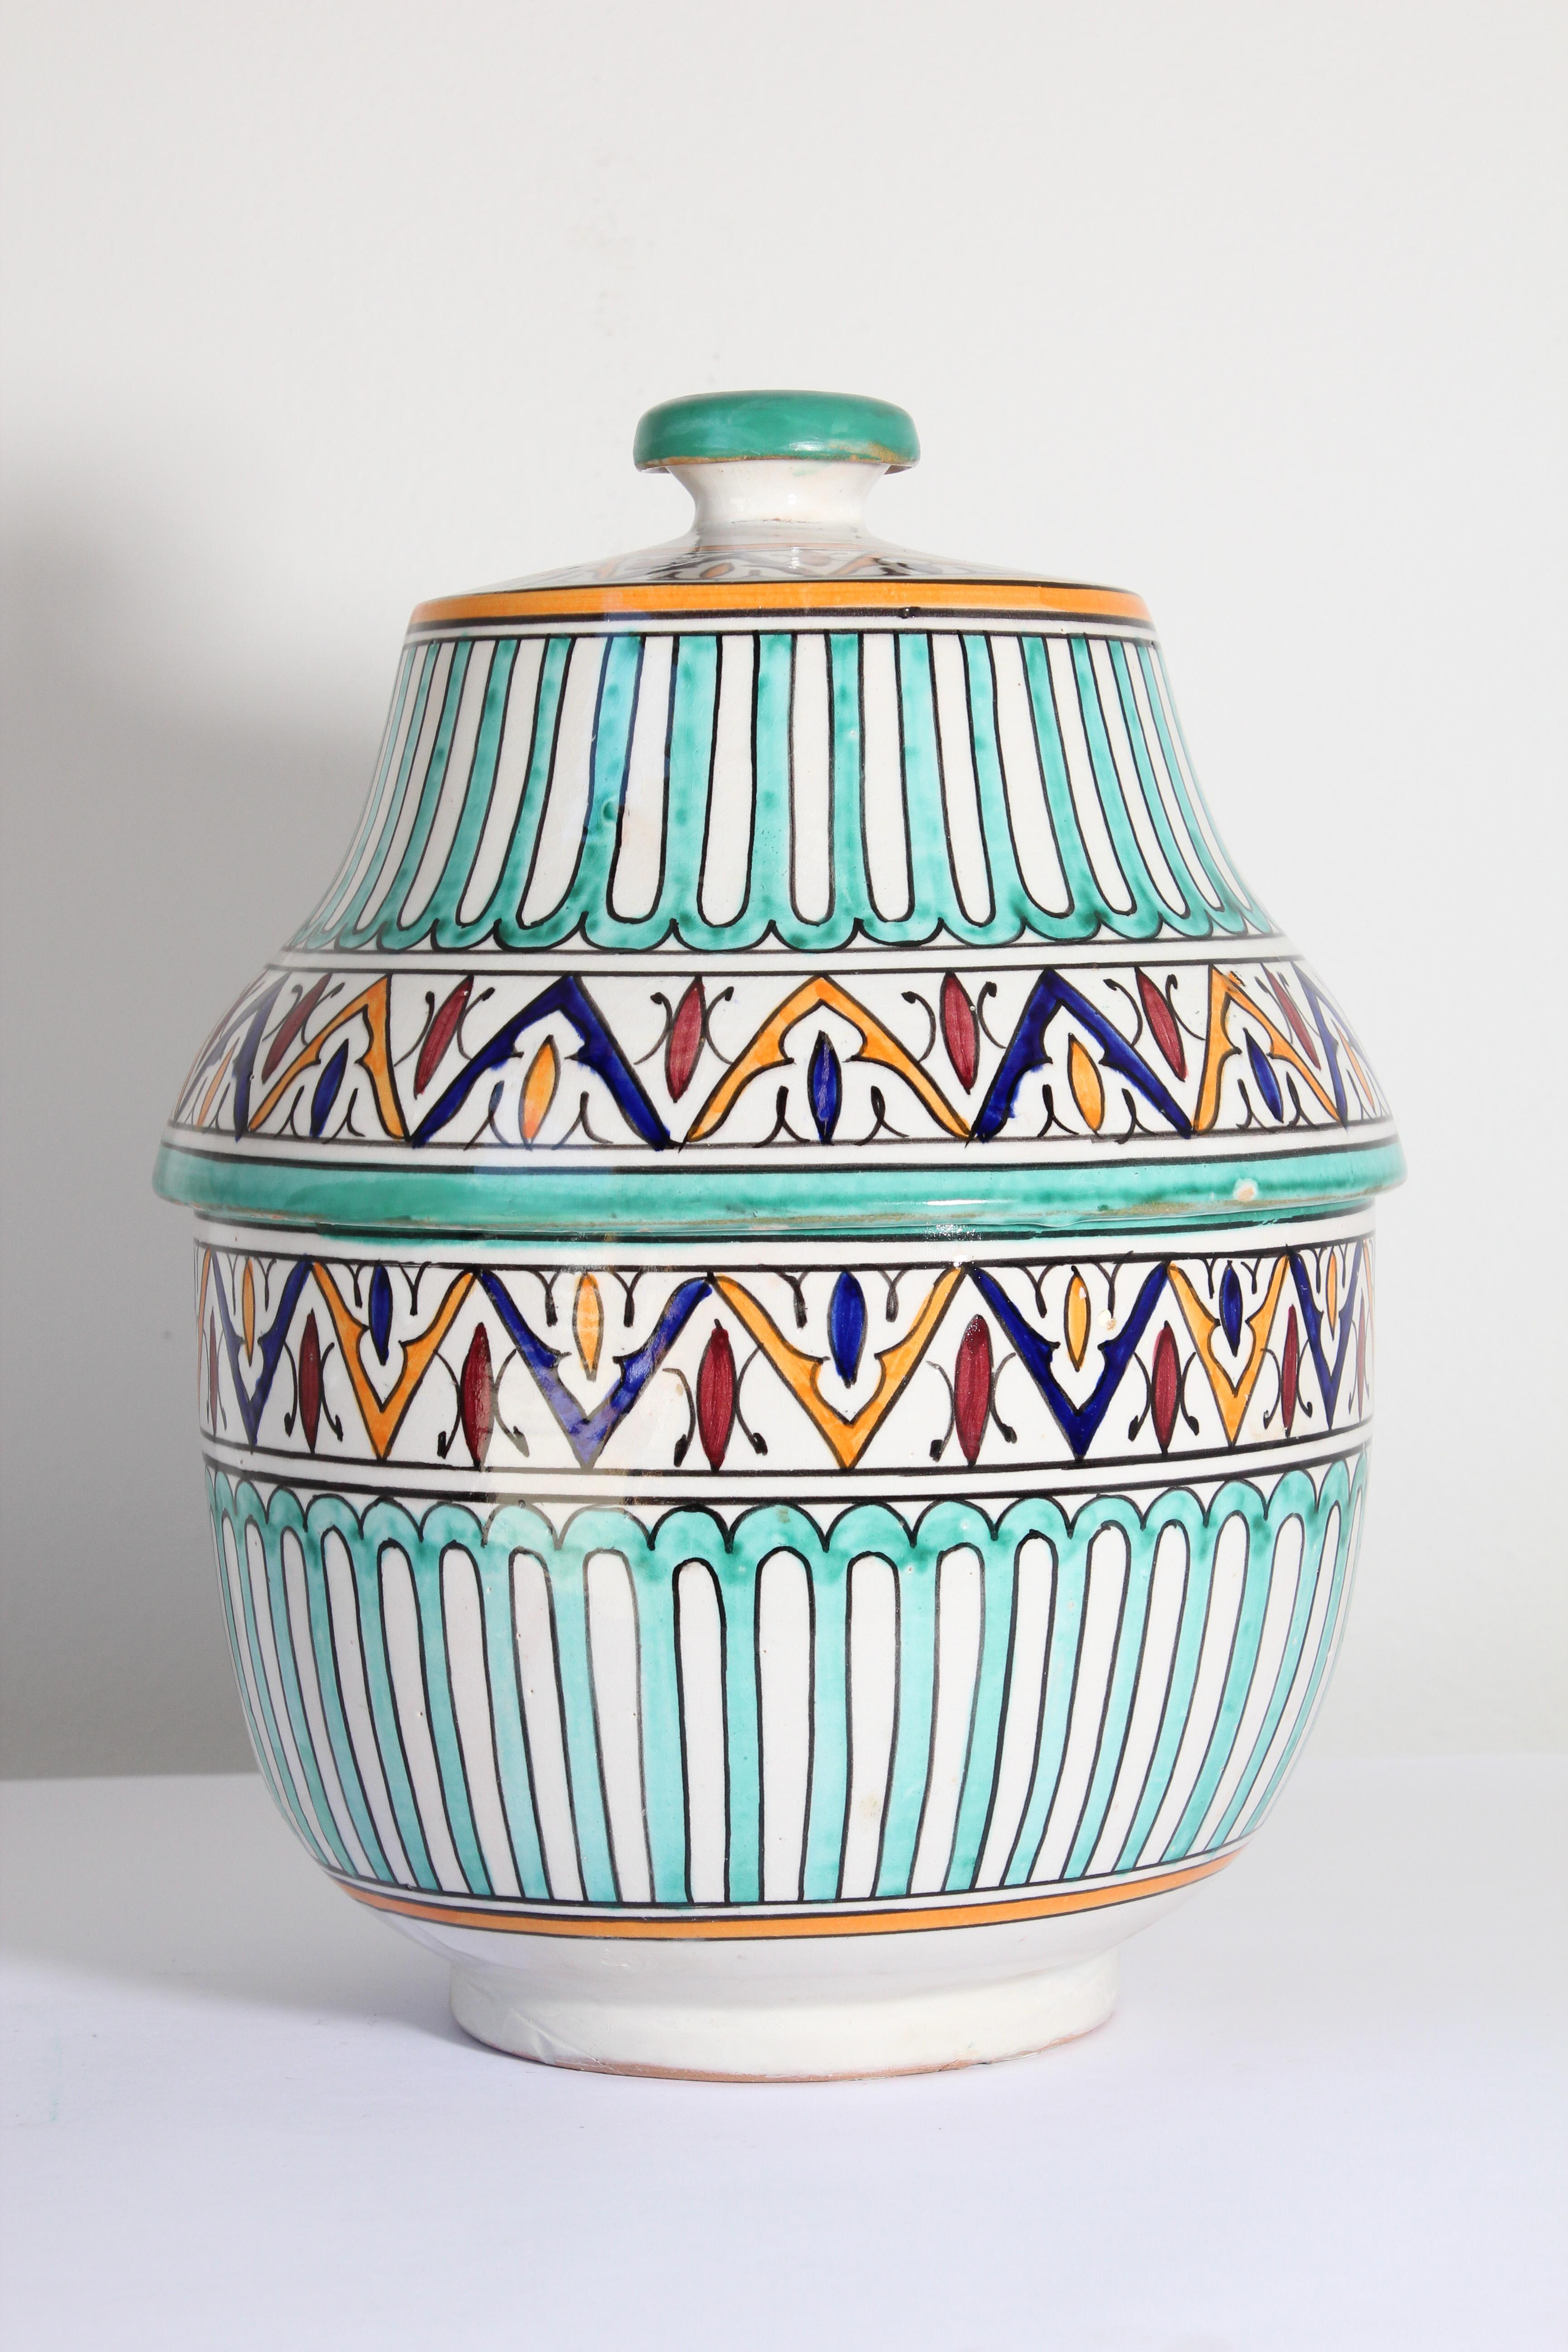 Moroccan glazed polychrome ceramic jar tureen with cover.
Hand painted ceramic Jubbana, handcrafted by skilled Moroccan artisans in Fez Morocco.
Moorish designs in turquoise, cobalt blue, teal, saffron yellow, prune and ivory colors.
Size: 14